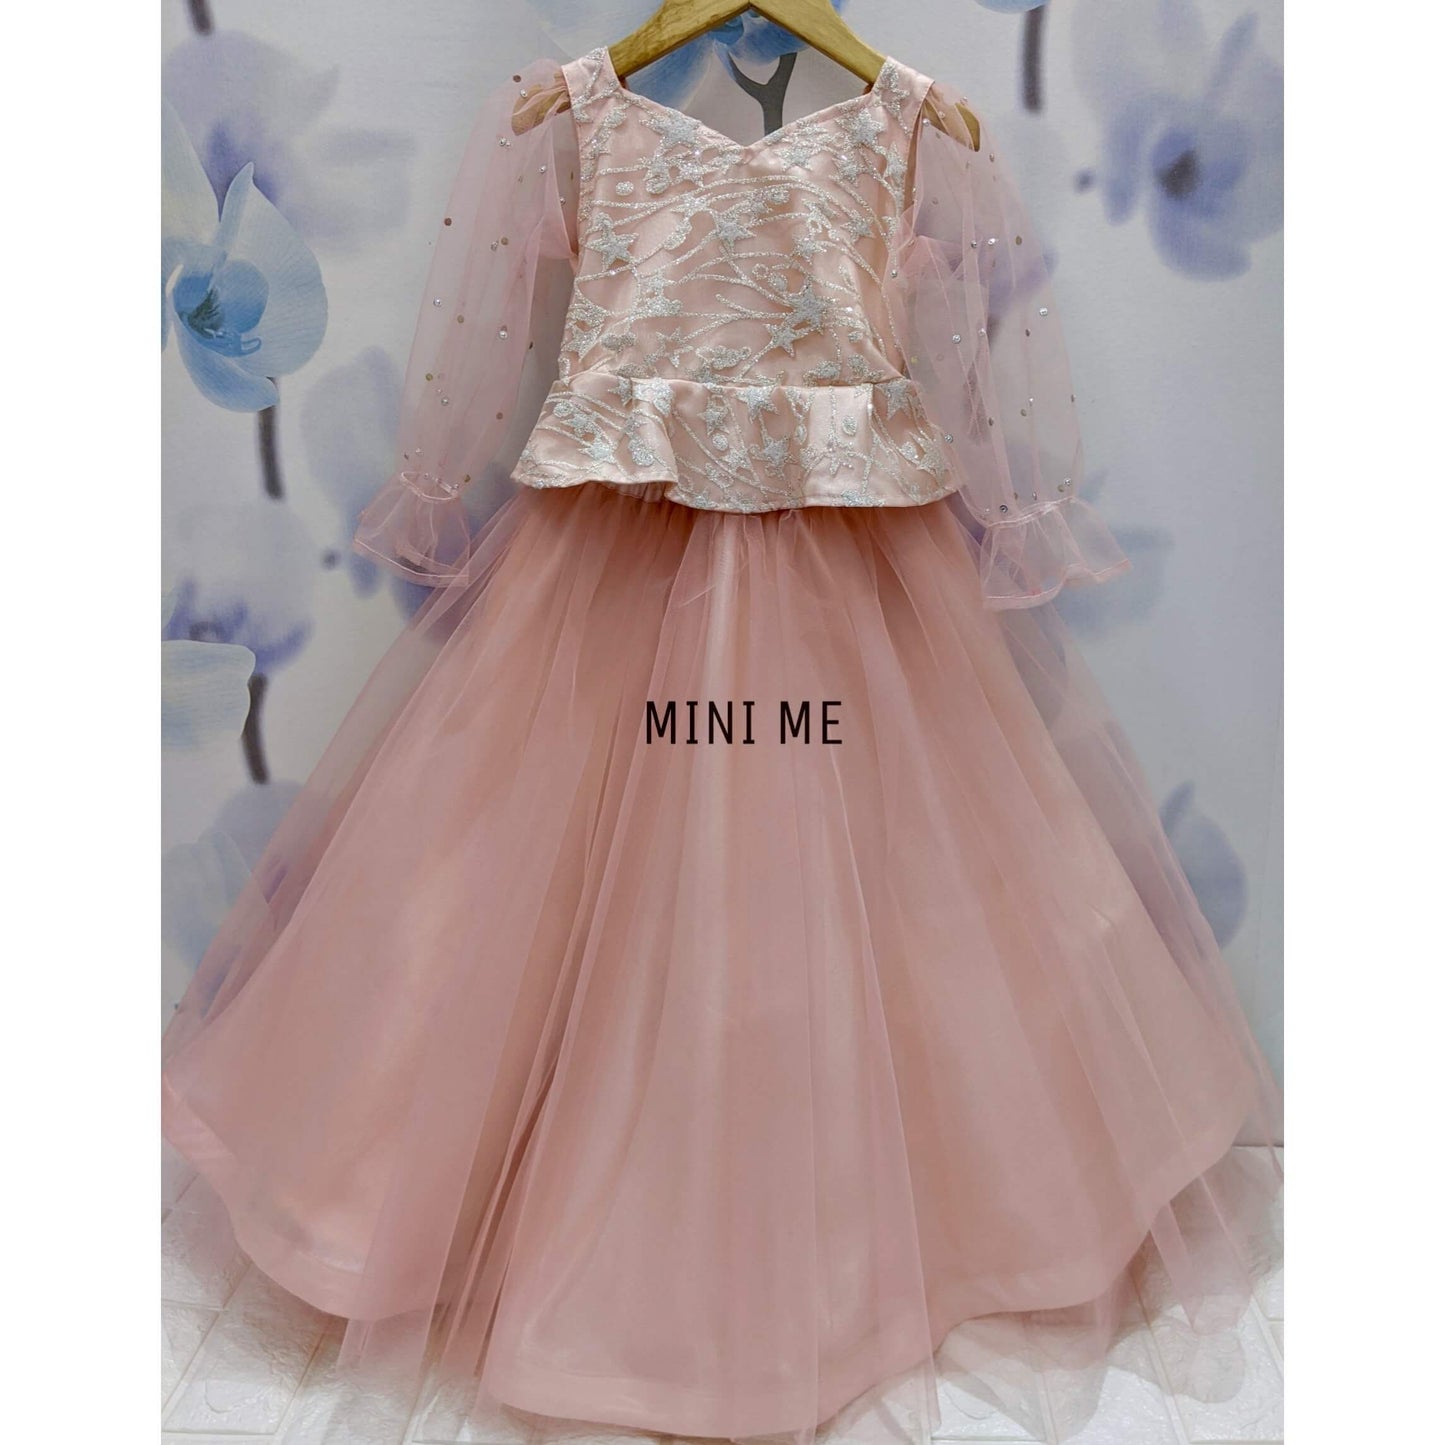 Fairy Princess Dress (With Accessories)  | Designer Wear for Kids and Girls